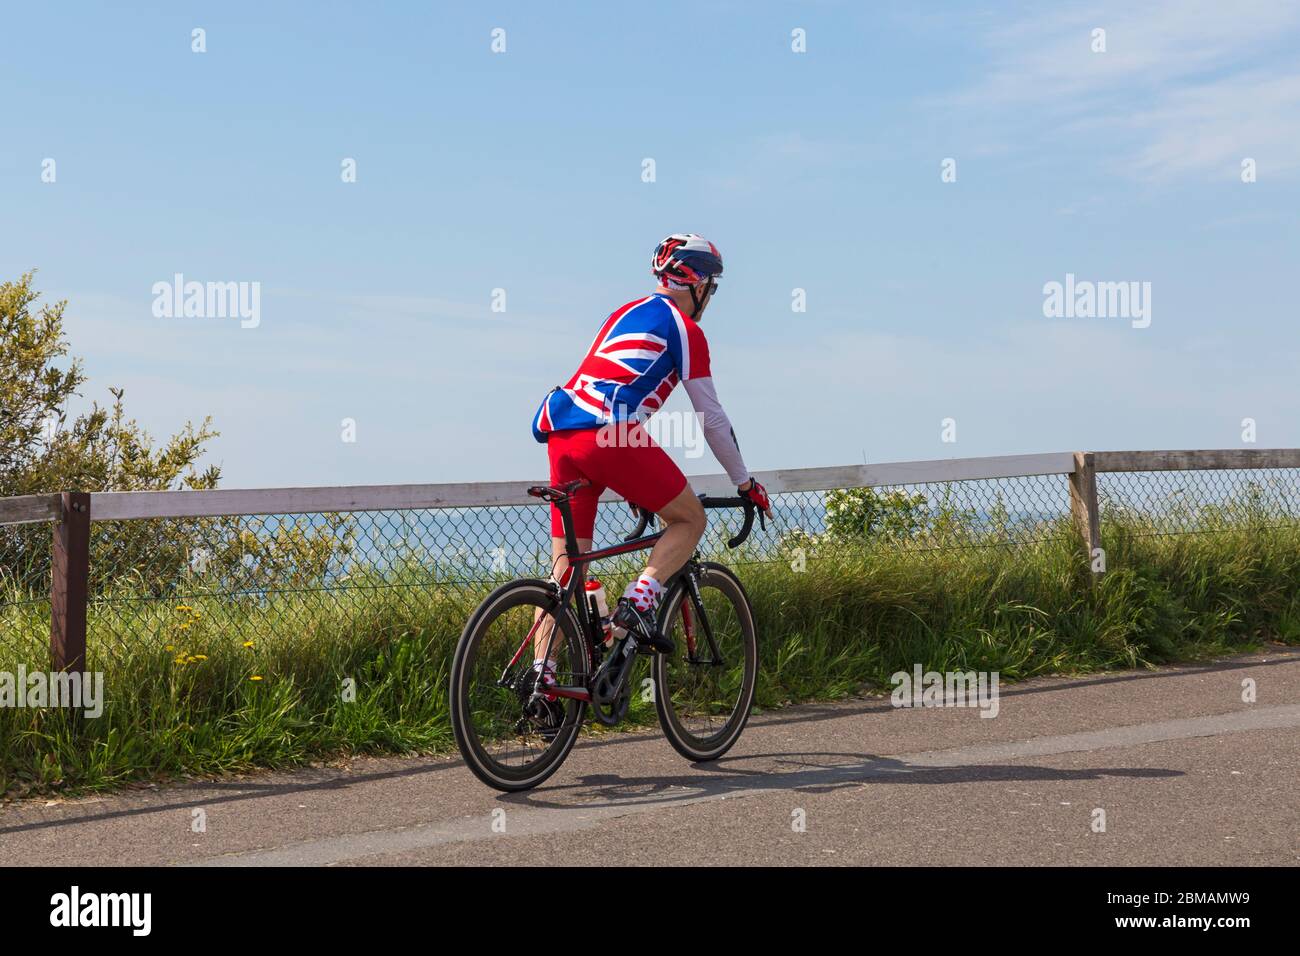 Bournemouth, Dorset UK. 8th May 2020. Nick shows his support  to celebrate VE day 75th Anniversary wearing red white and blue Union Jack clothing on his bike ride on a lovely warm sunny day, as organised events are cancelled due to Coronavirus restrictions. Cyclist riding bike bicycle. Credit: Carolyn Jenkins/Alamy Live News Stock Photo